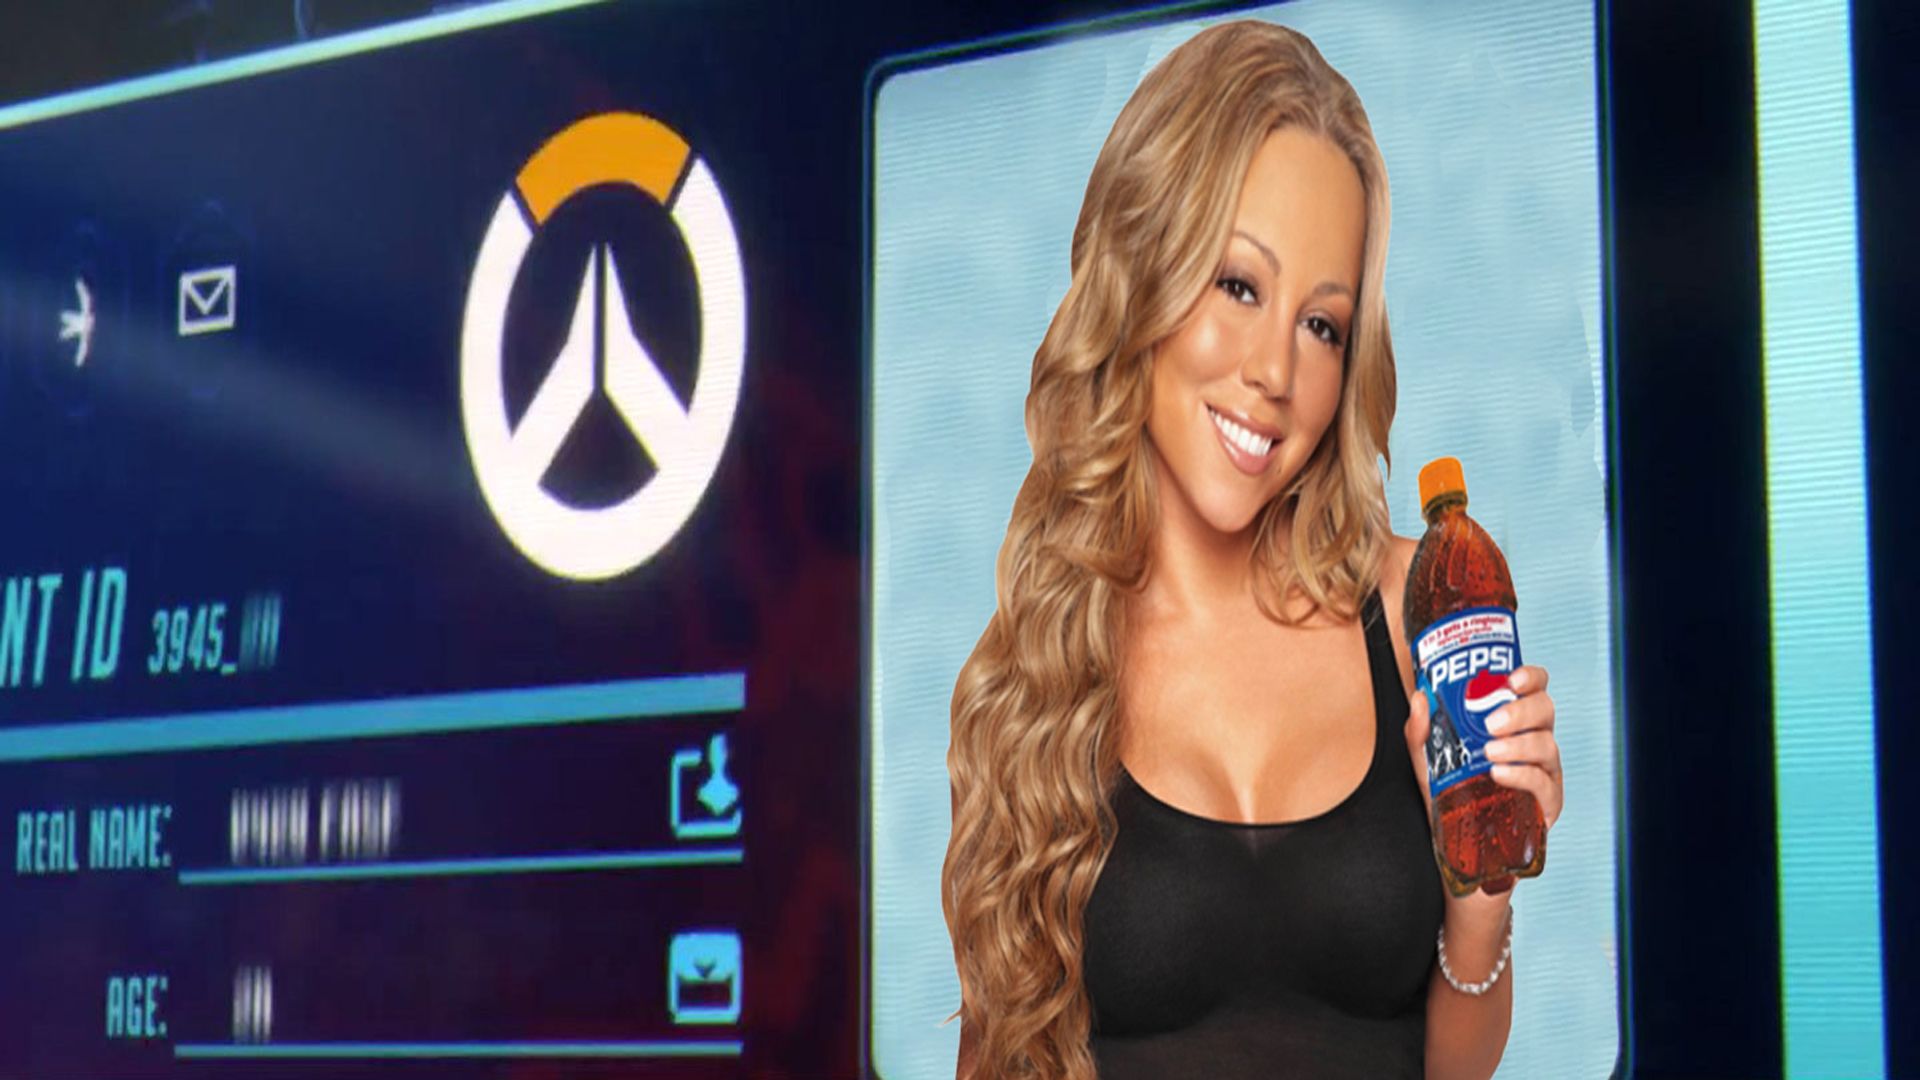 Mariah Carey Will Be The Newest Overwatch Hero Thanks To Partnership With Blizzard